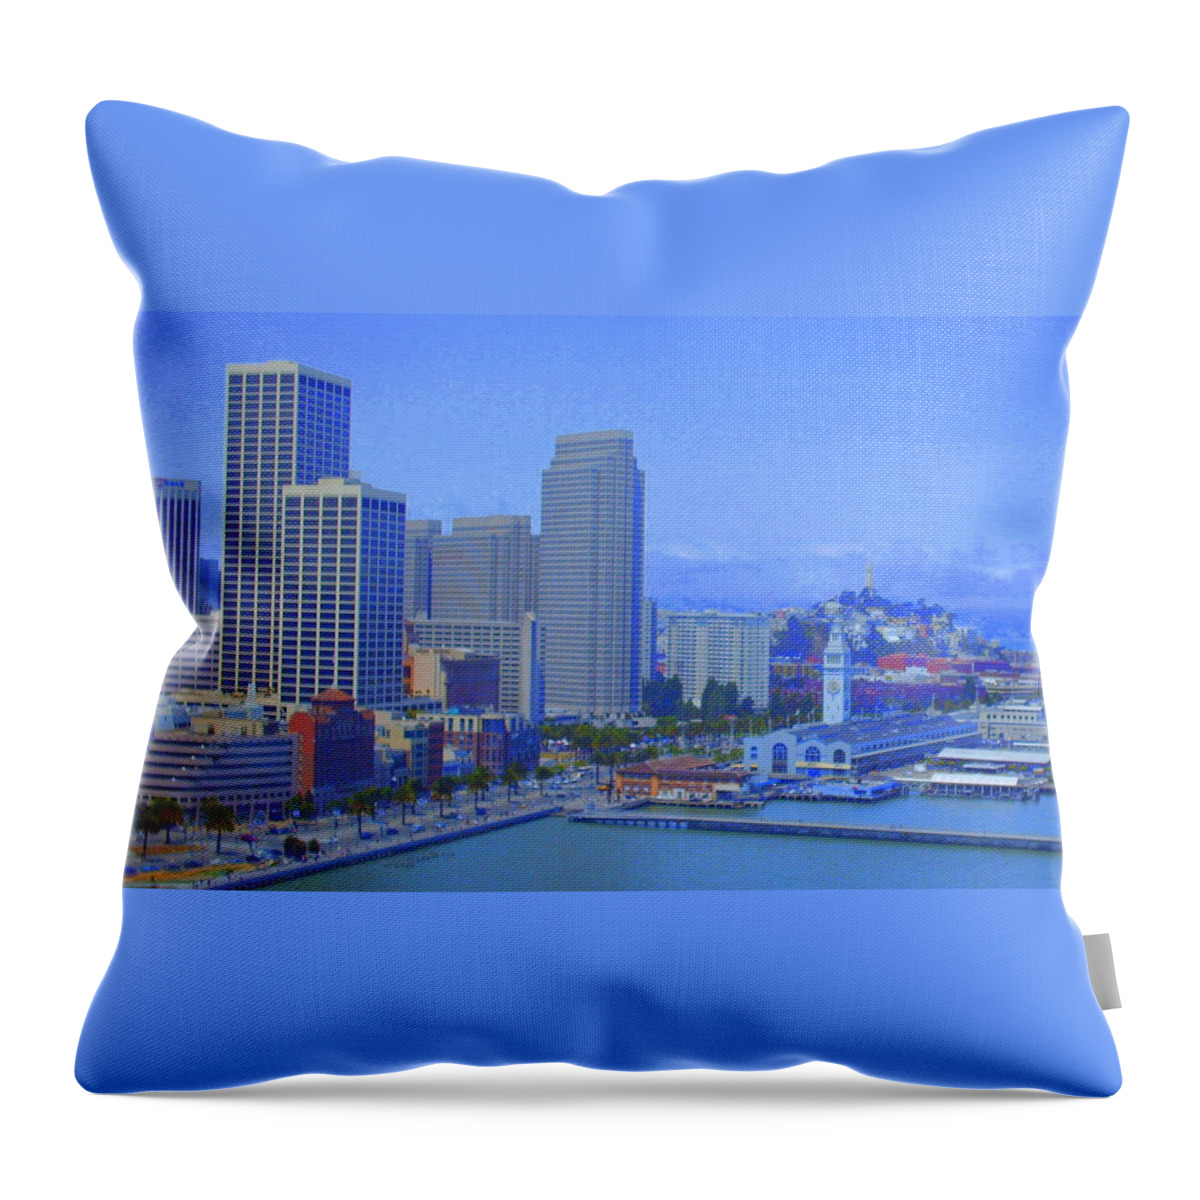 Cityscene Throw Pillow featuring the photograph San Francisco Bay by Julie Lueders 